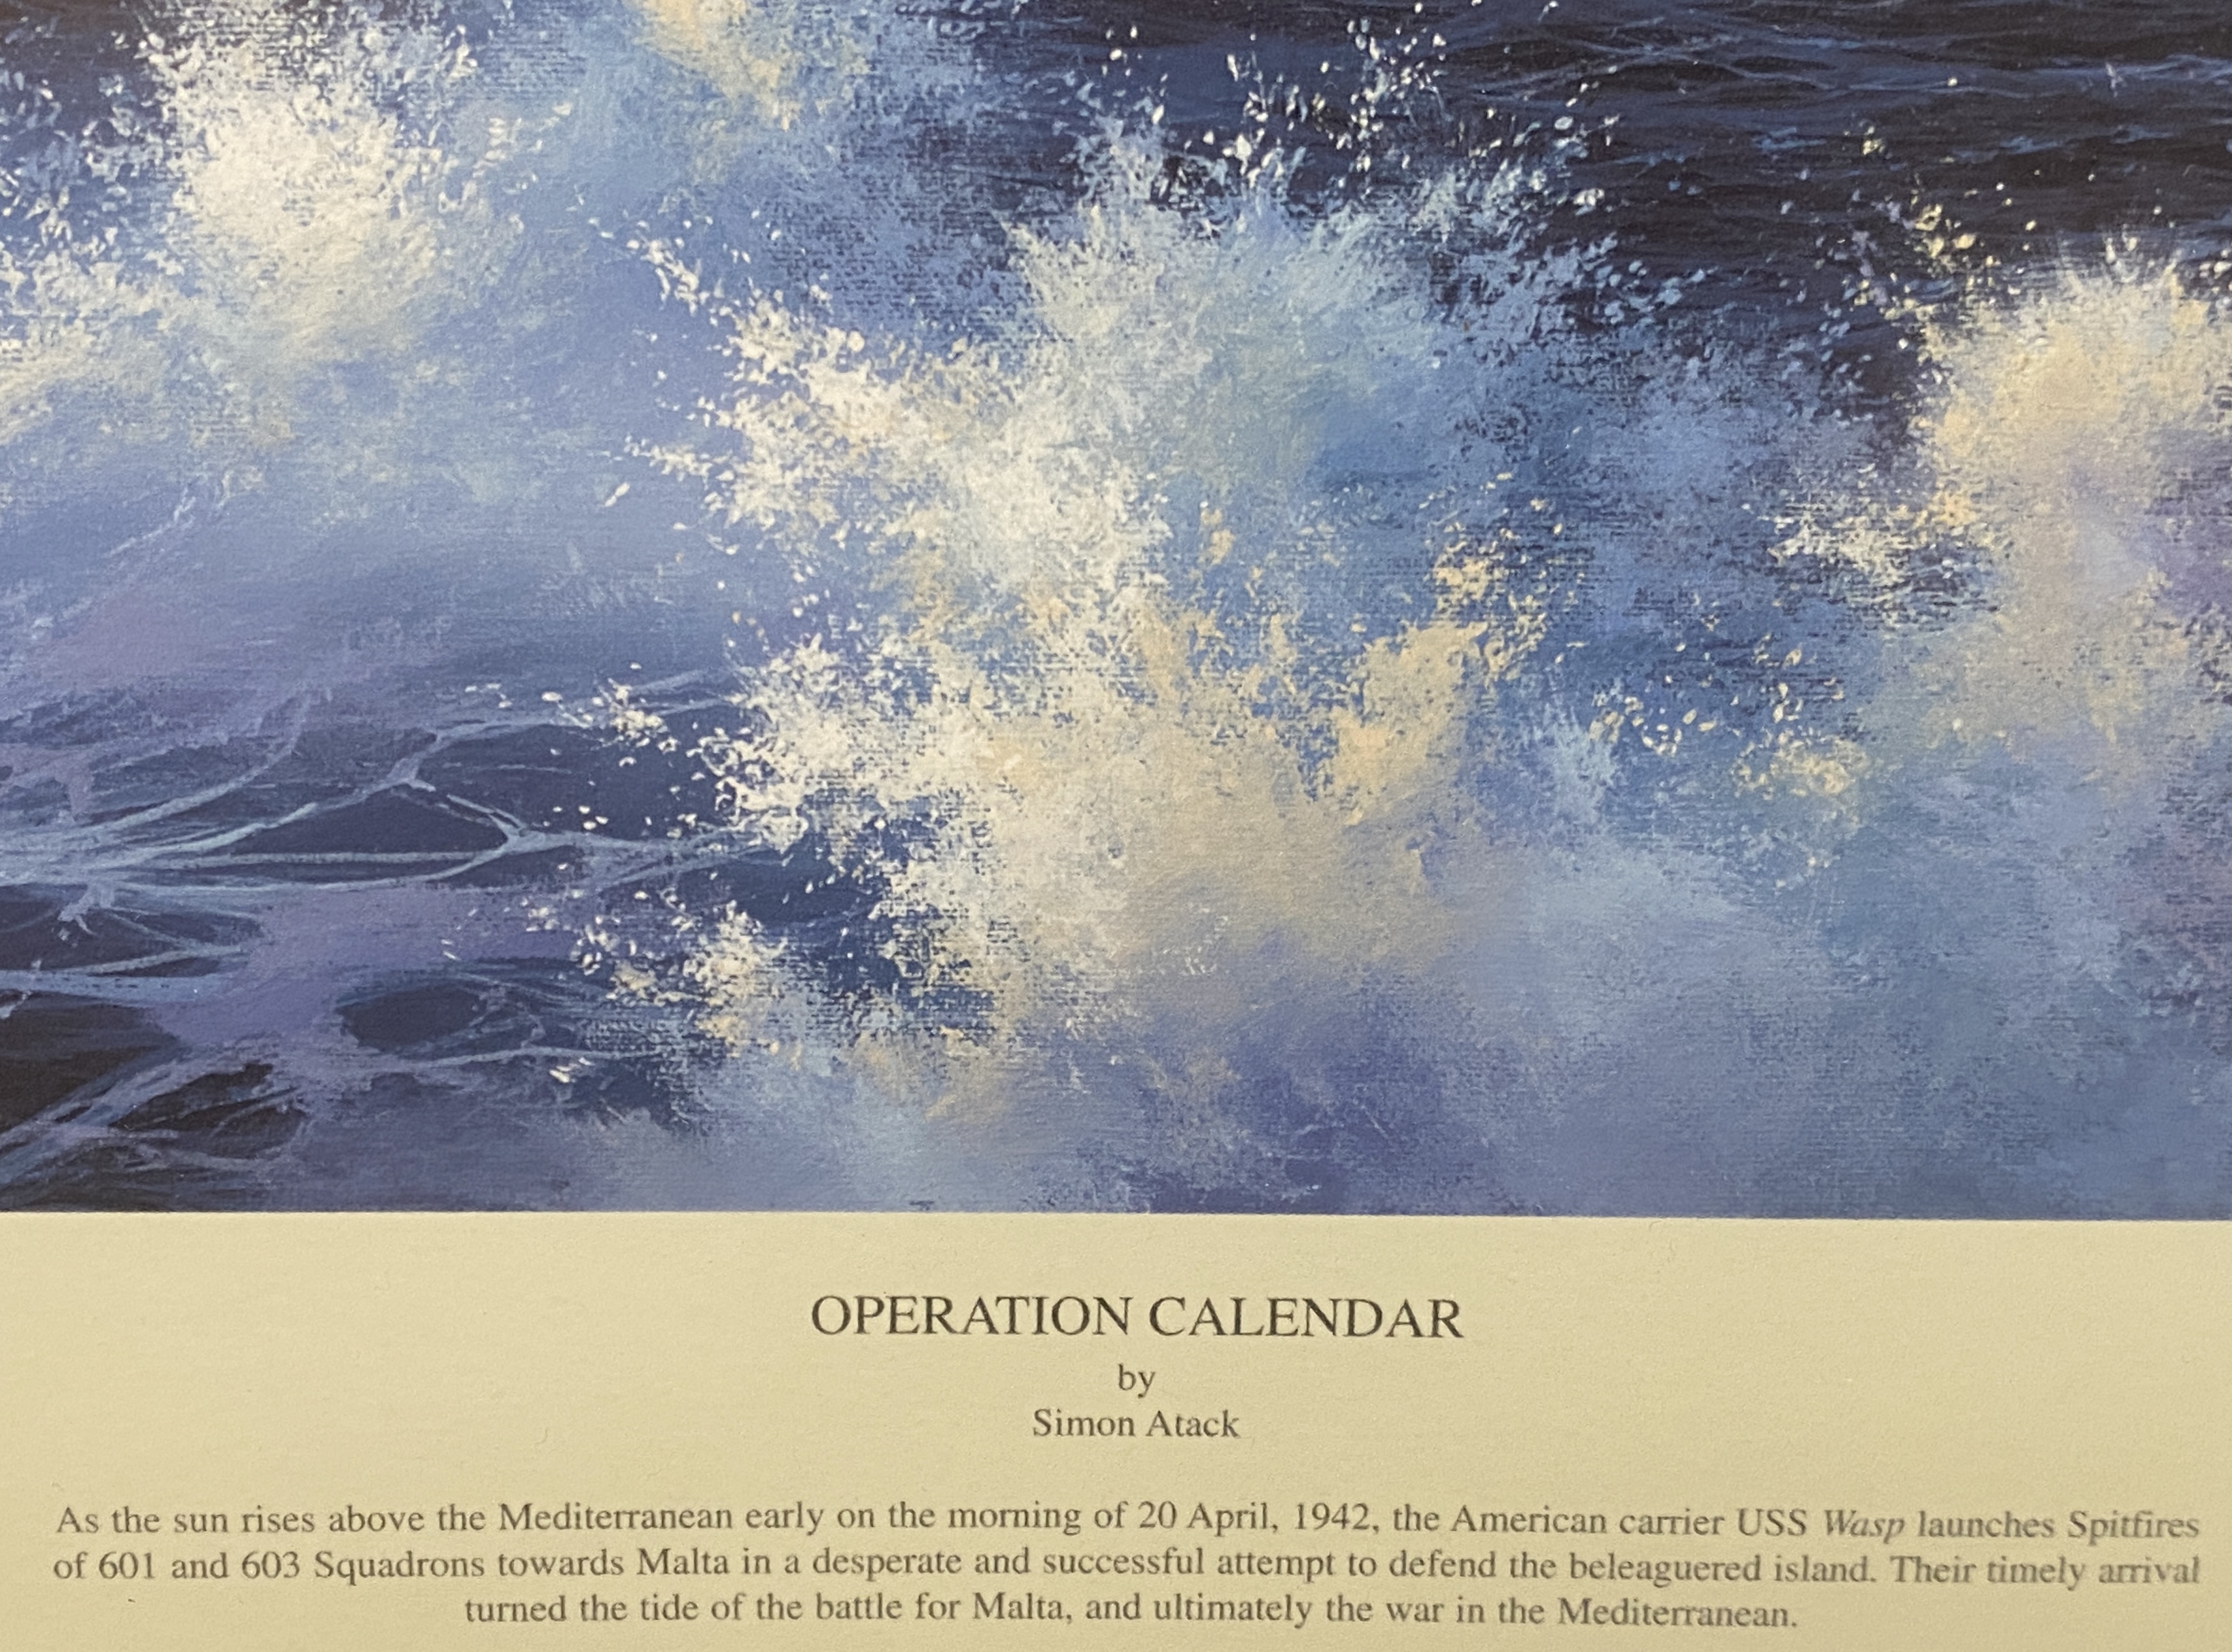 Simon Atack 'Operation Calendar' a framed artists proof no 2/25 featuring spitfires taking off from - Image 3 of 8